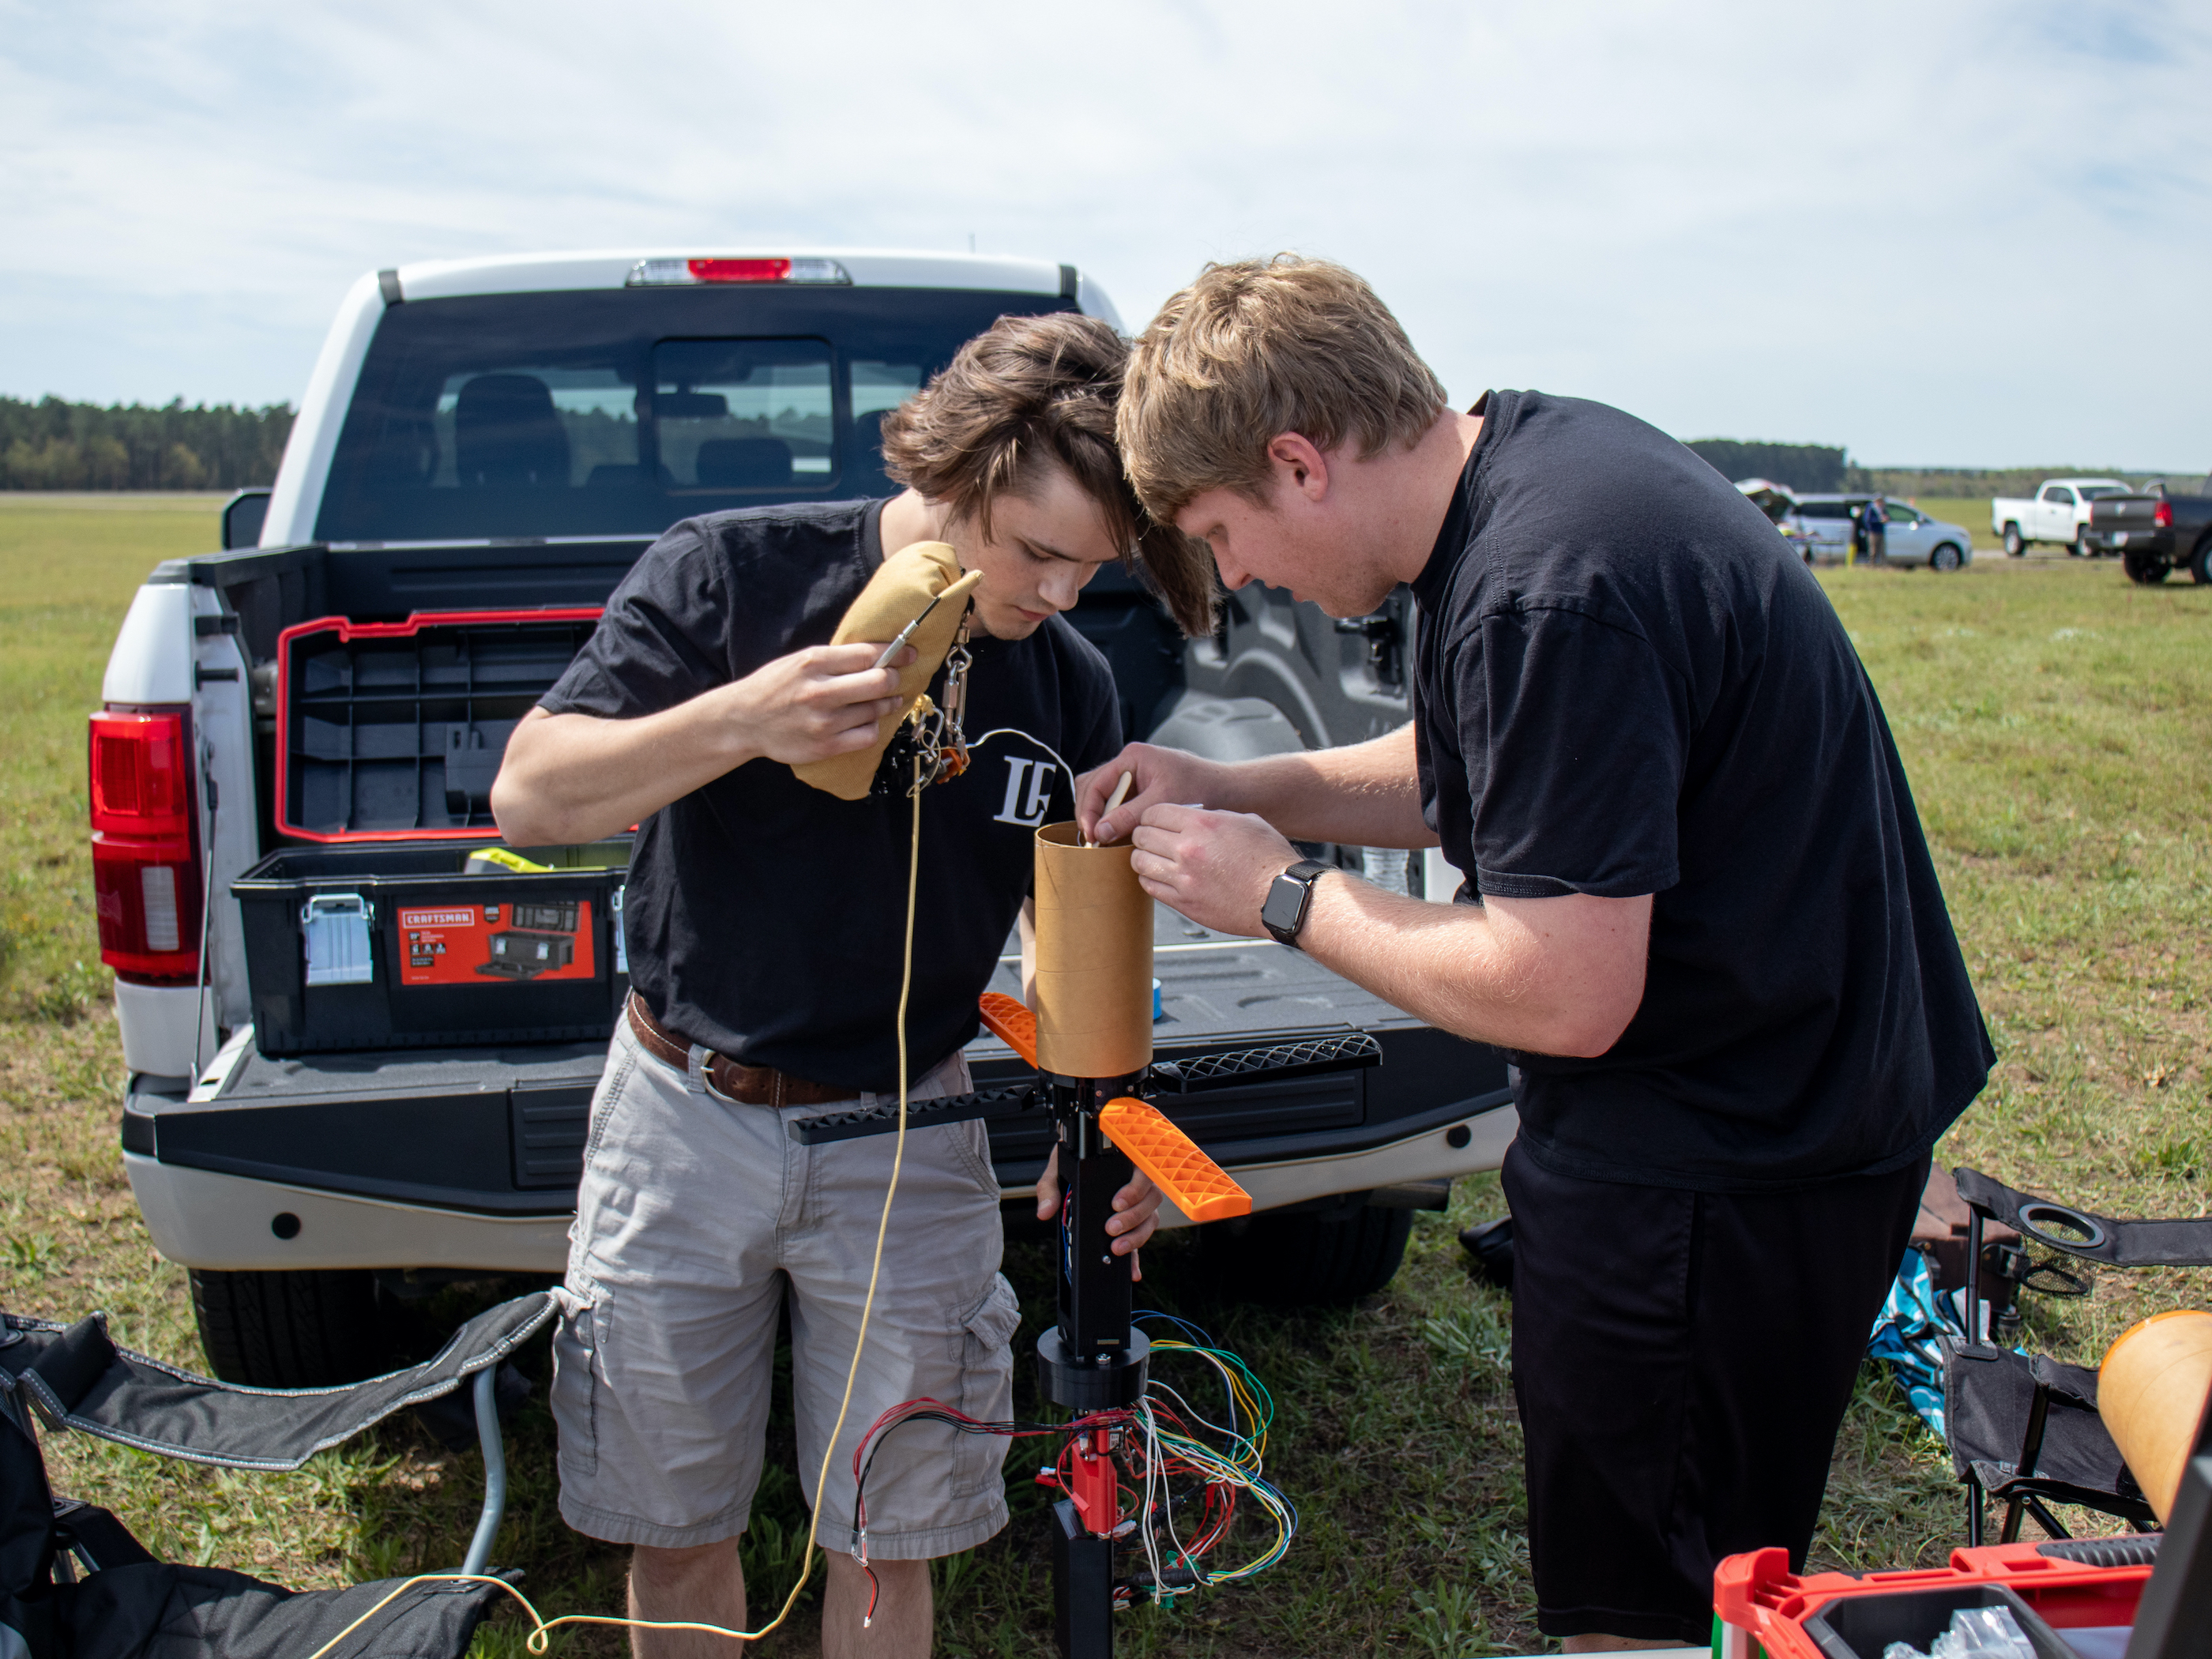 Two male students work outside on assembling a prototype rocket